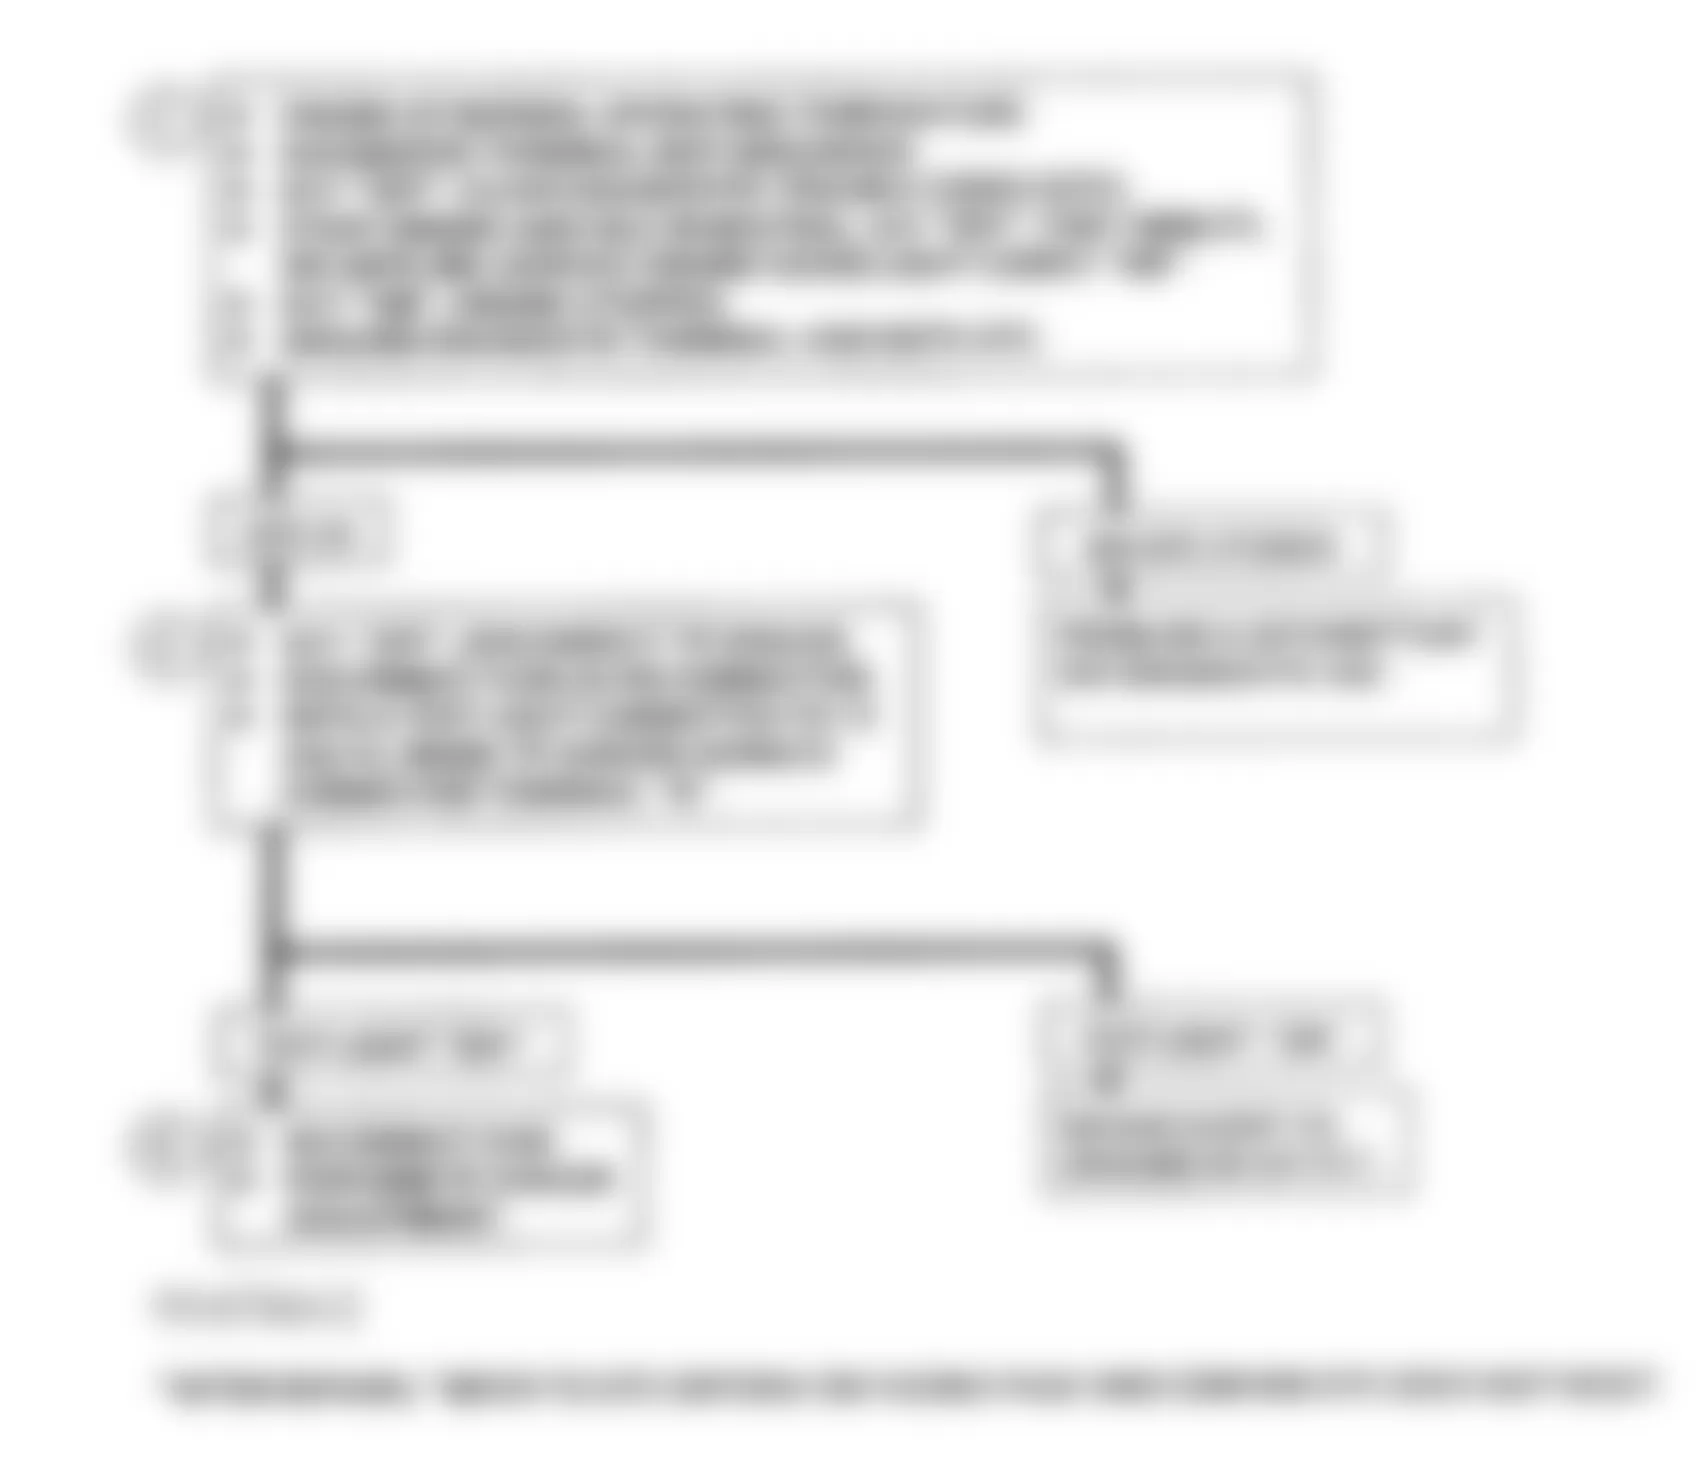 Chevrolet Pickup C3500 1993 - Component Locations -  DTC 23, Flowchart, TPS Misadjusted